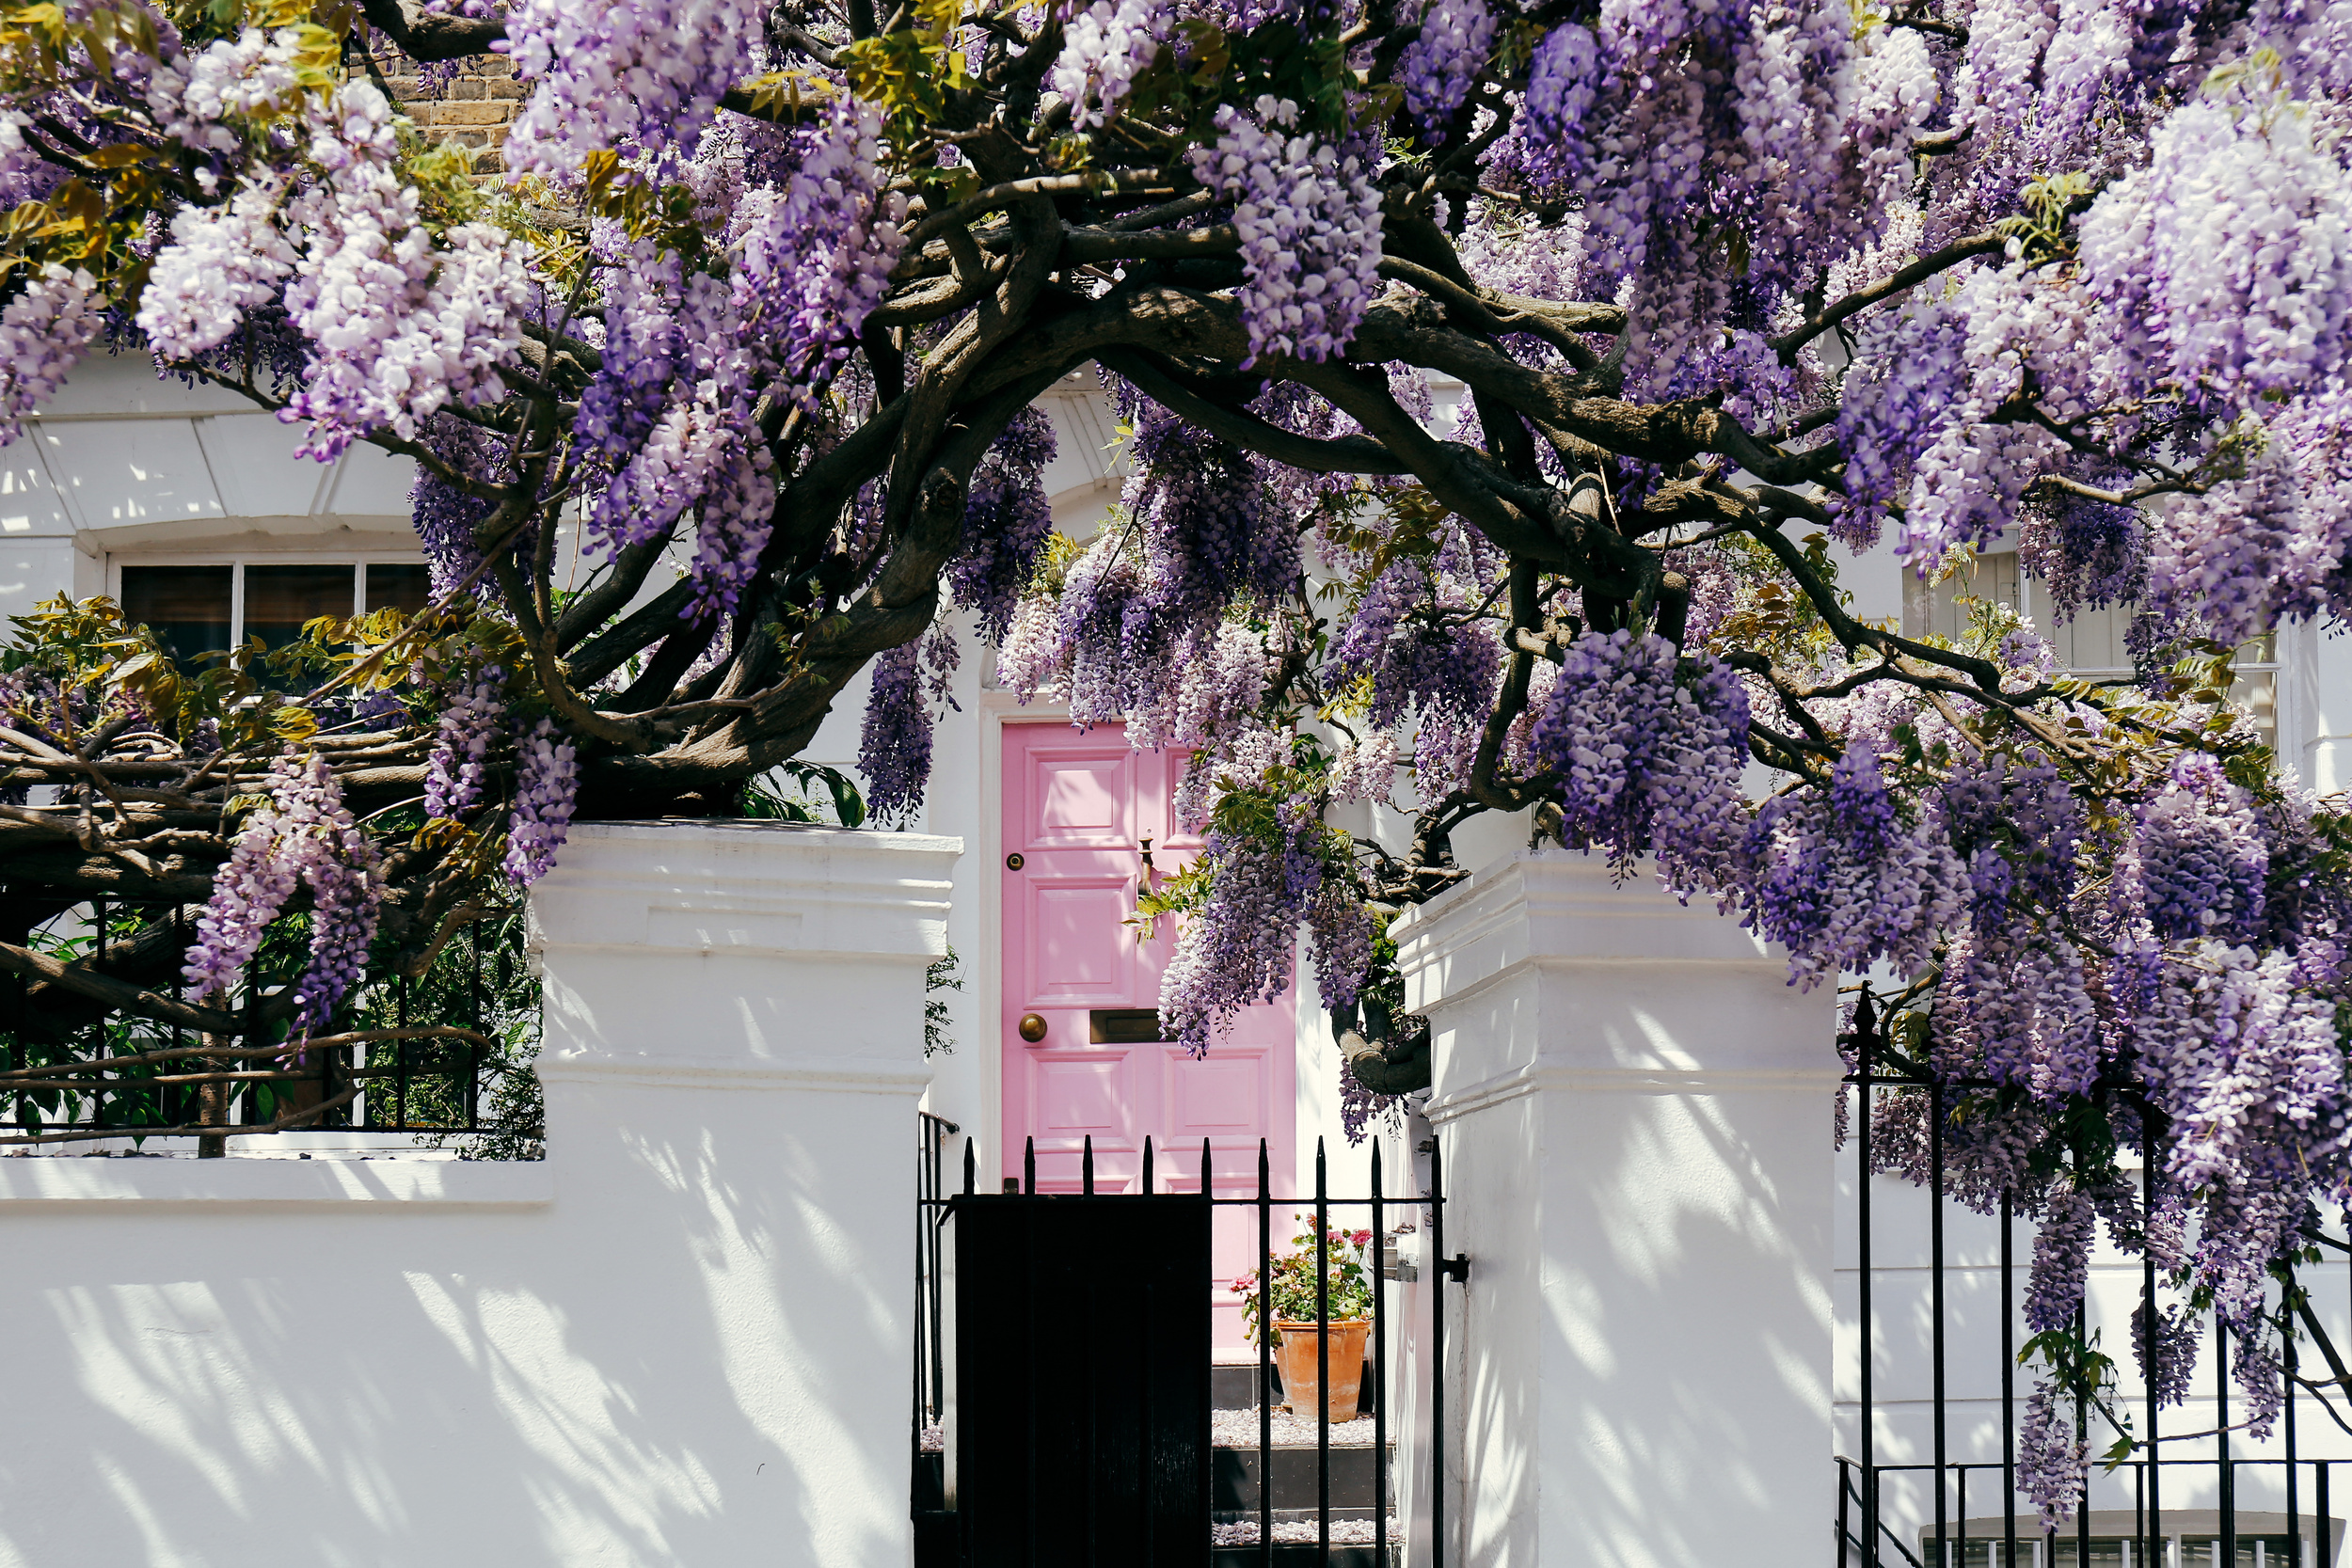 <p>Another major city that comes alive after a long winter, London is an ideal spring destination. The main event is the wisteria that covers buildings throughout the metropolis.</p><p><a href='https://www.msn.com/en-us/community/channel/vid-cj9pqbr0vn9in2b6ddcd8sfgpfq6x6utp44fssrv6mc2gtybw0us'>Follow us on MSN to see more of our exclusive lifestyle content.</a></p>